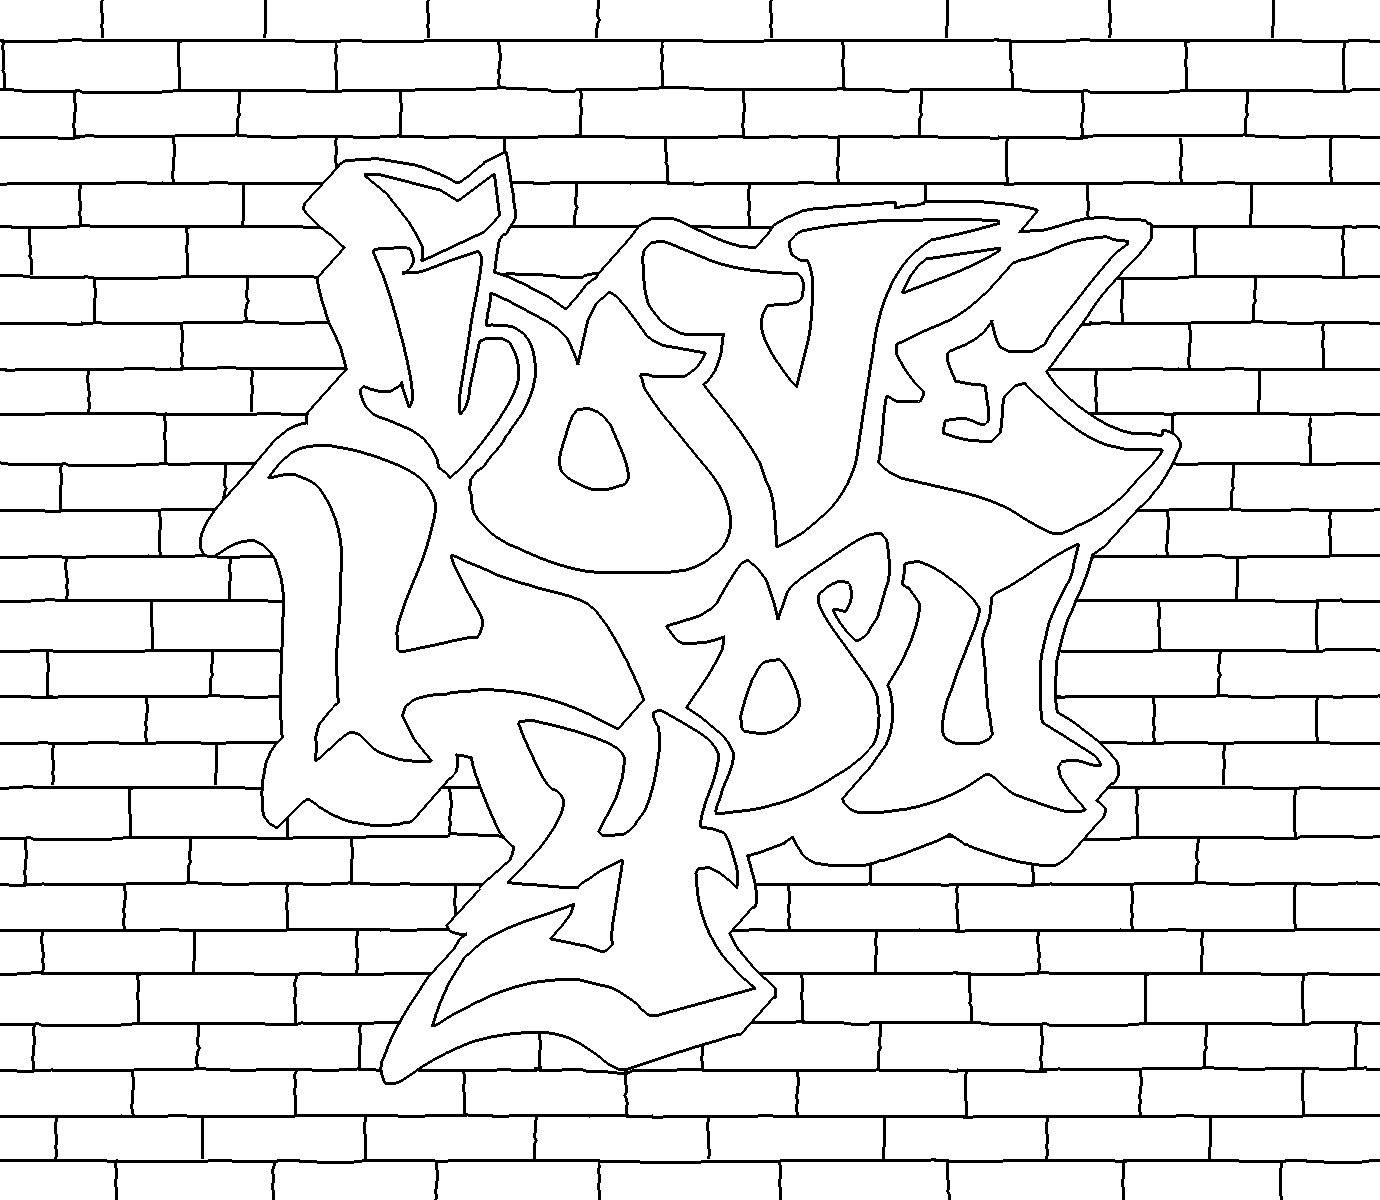 graffiti coloring pages for teens and adults best coloring pages for kids